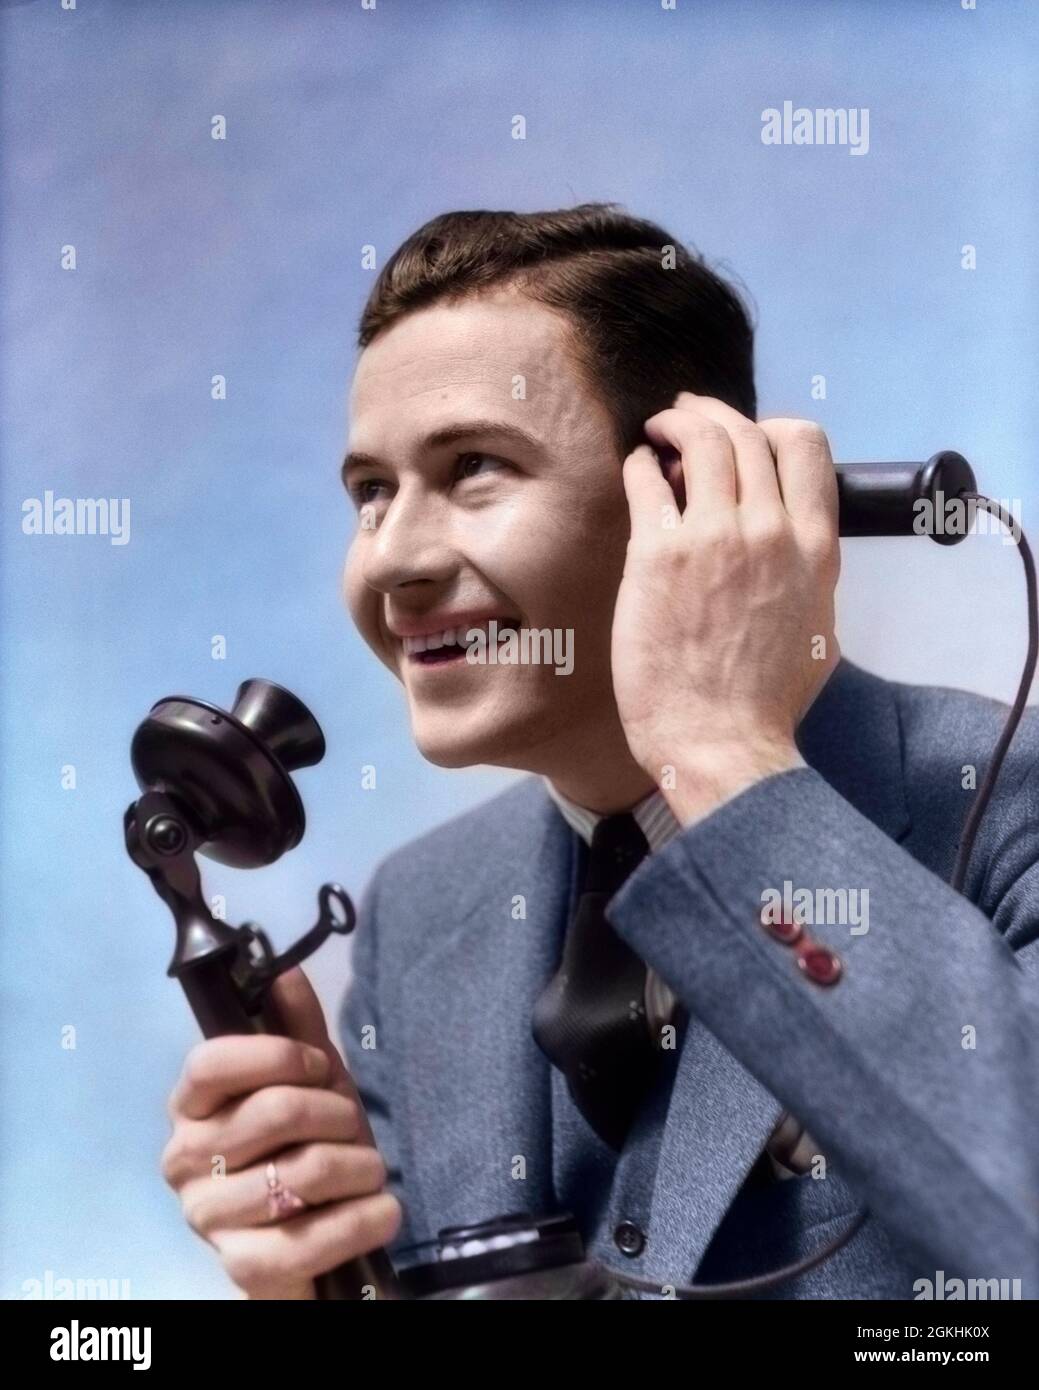 1920s 1930s MAN TALKING ON CANDLESTICK PHONE - t4772c HAR001 HARS OLD FASHION CONVERSATION 1 COMMUNICATION LISTEN PORTRAITS GROWNUP COPY SPACE SPEAK AMERICANA HEAR JOURNALIST CANDLESTICK SINGULAR HEAD AND SHOULDERS ARCHIVAL GLAD CANDLESTICK PHONE OCCUPATIONS PHONES BUSINESS MAN BUSINESS MEN BUSINESS PEOPLE TELEPHONES BUSINESSPEOPLE BUSINESSPERSON DELIGHT HEARING EAGER MID-ADULT MID-ADULT MAN CAUCASIAN ETHNICITY HAR001 OLD FASHIONED Stock Photo